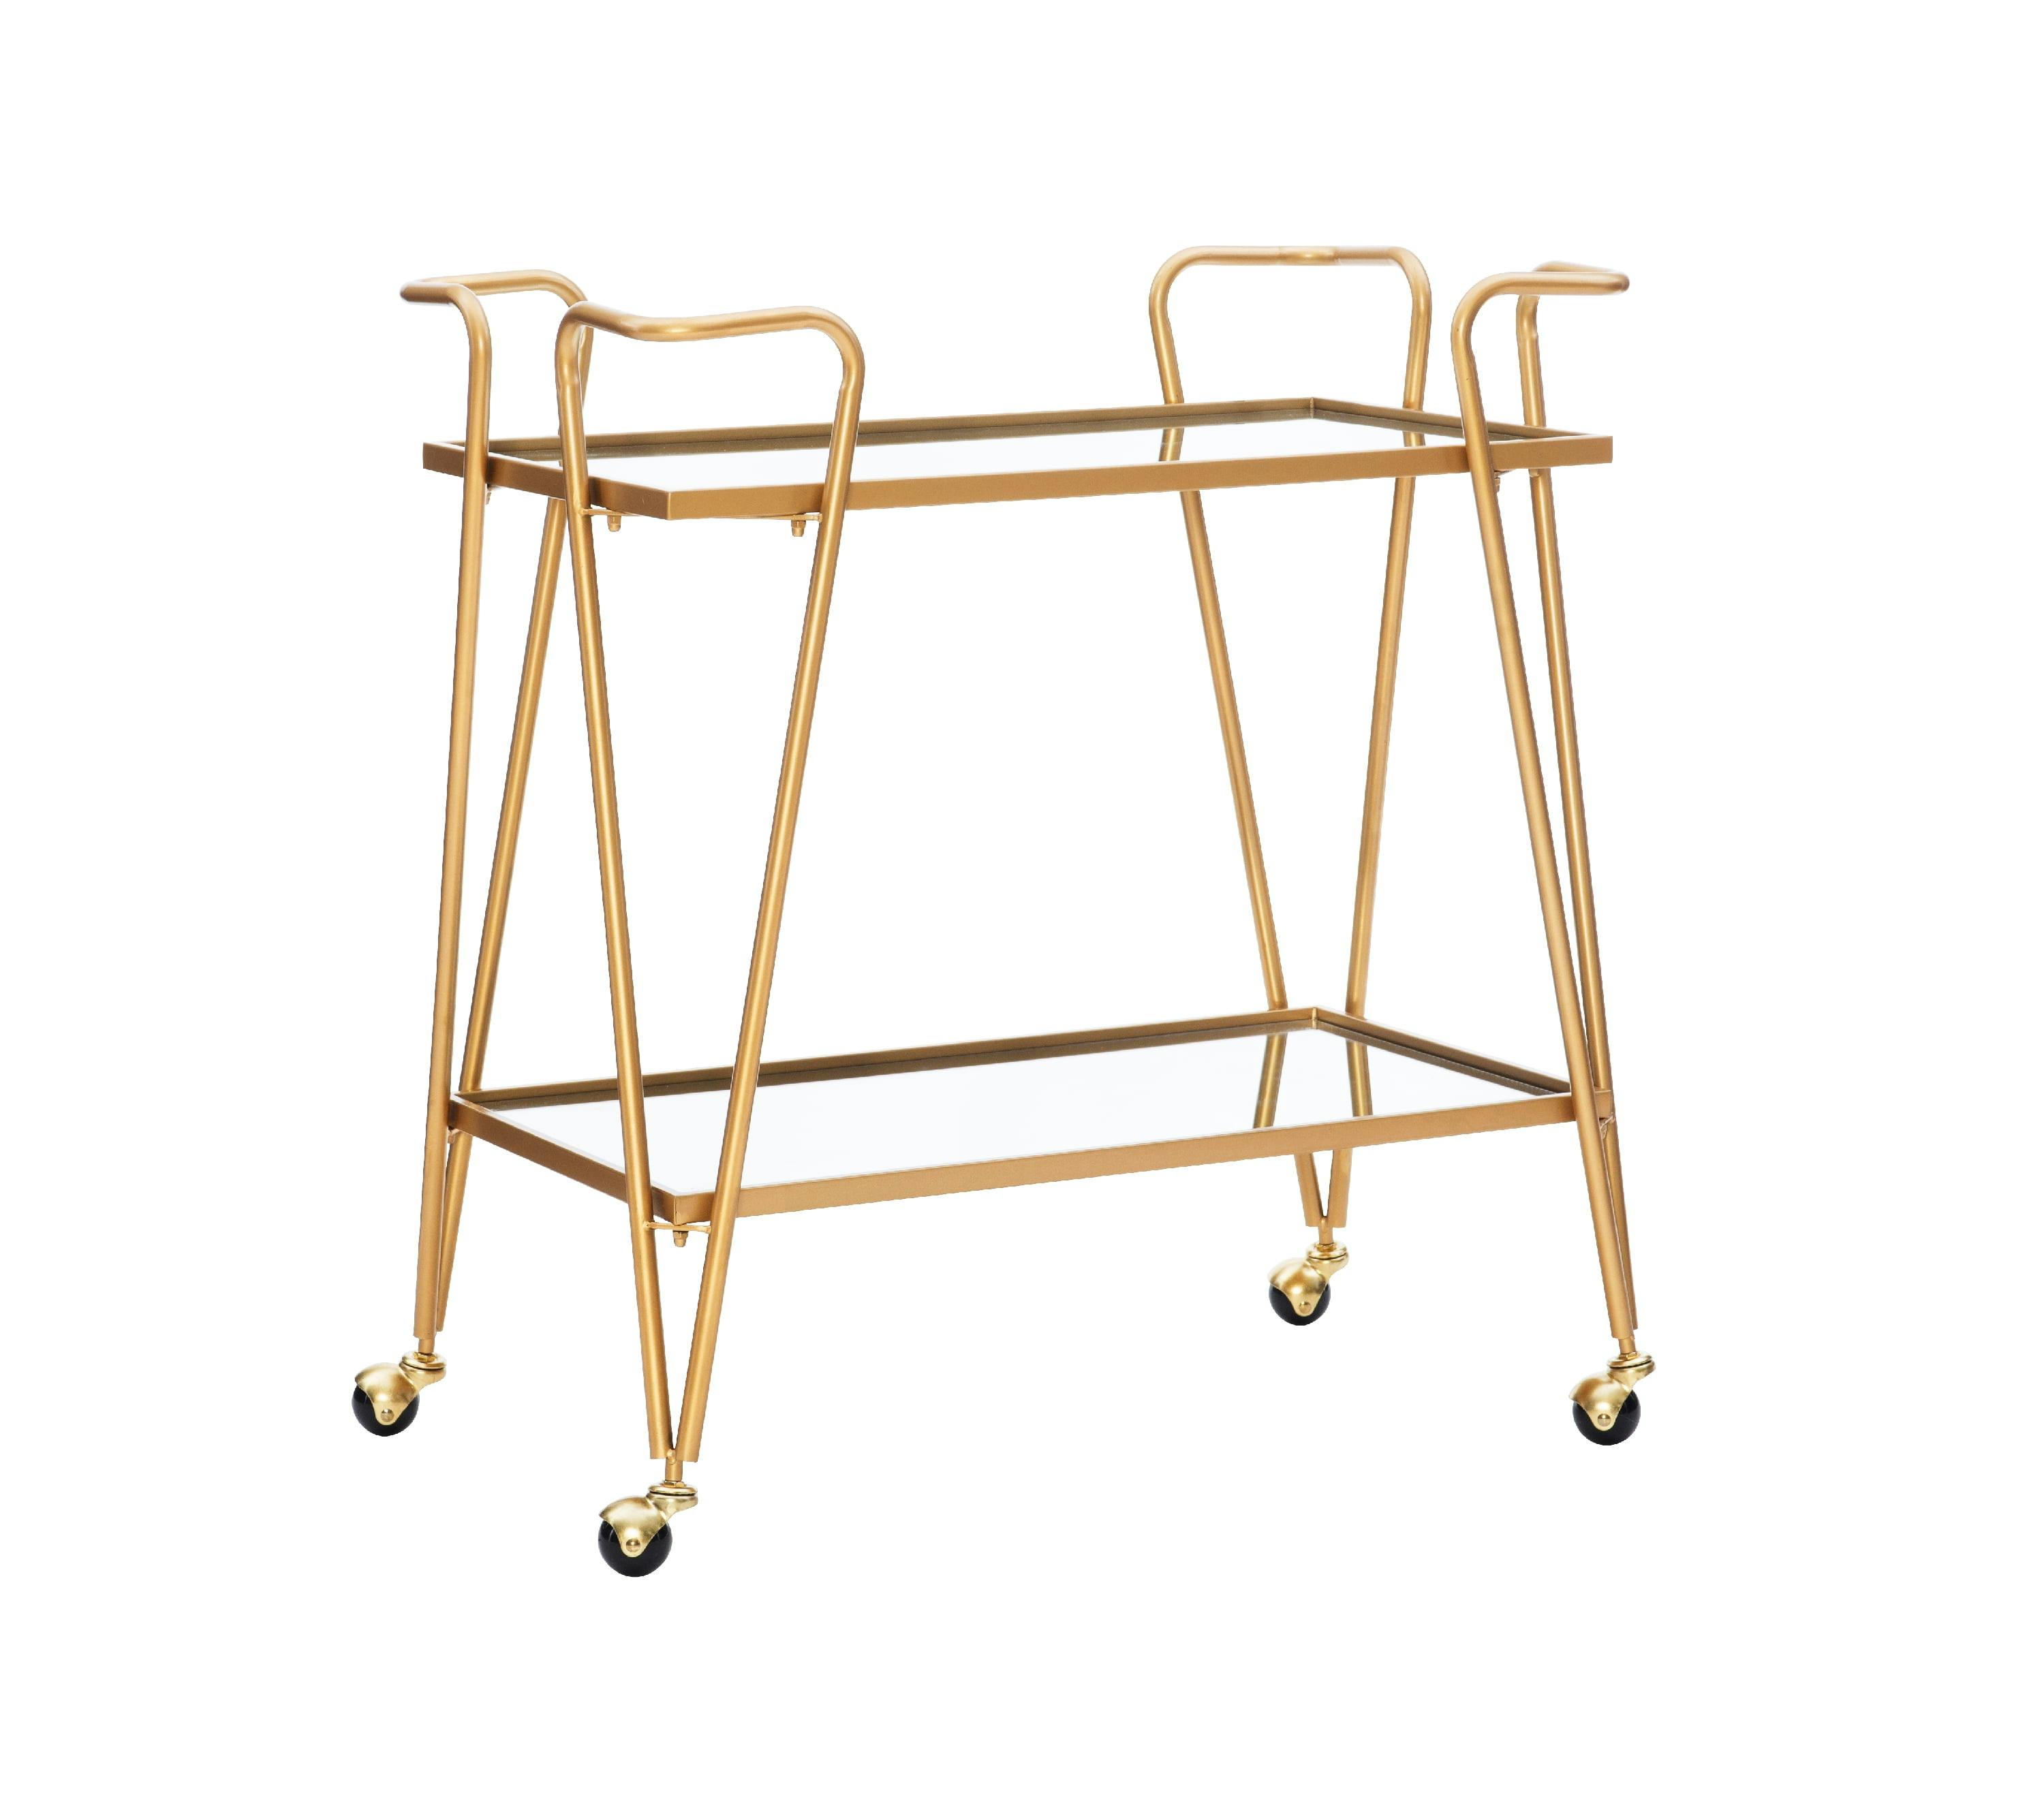 Lawsonia Gold 2-Tier Mid-Century Mobile Bar Cart with Mirrored Shelves